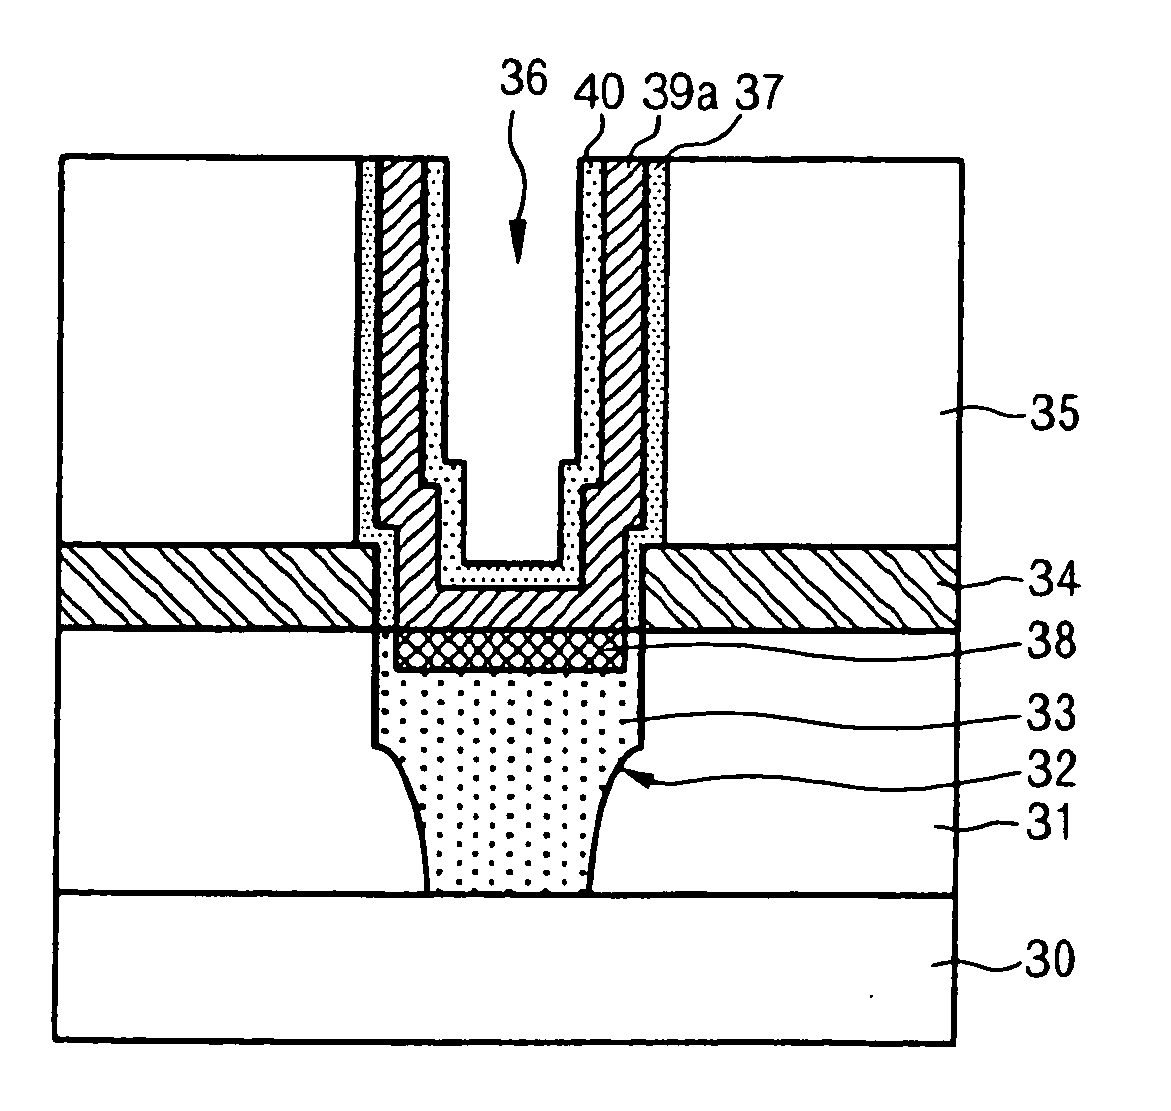 Method of forming a capacitor in a semiconductor device without wet etchant damage to the capacitor parts